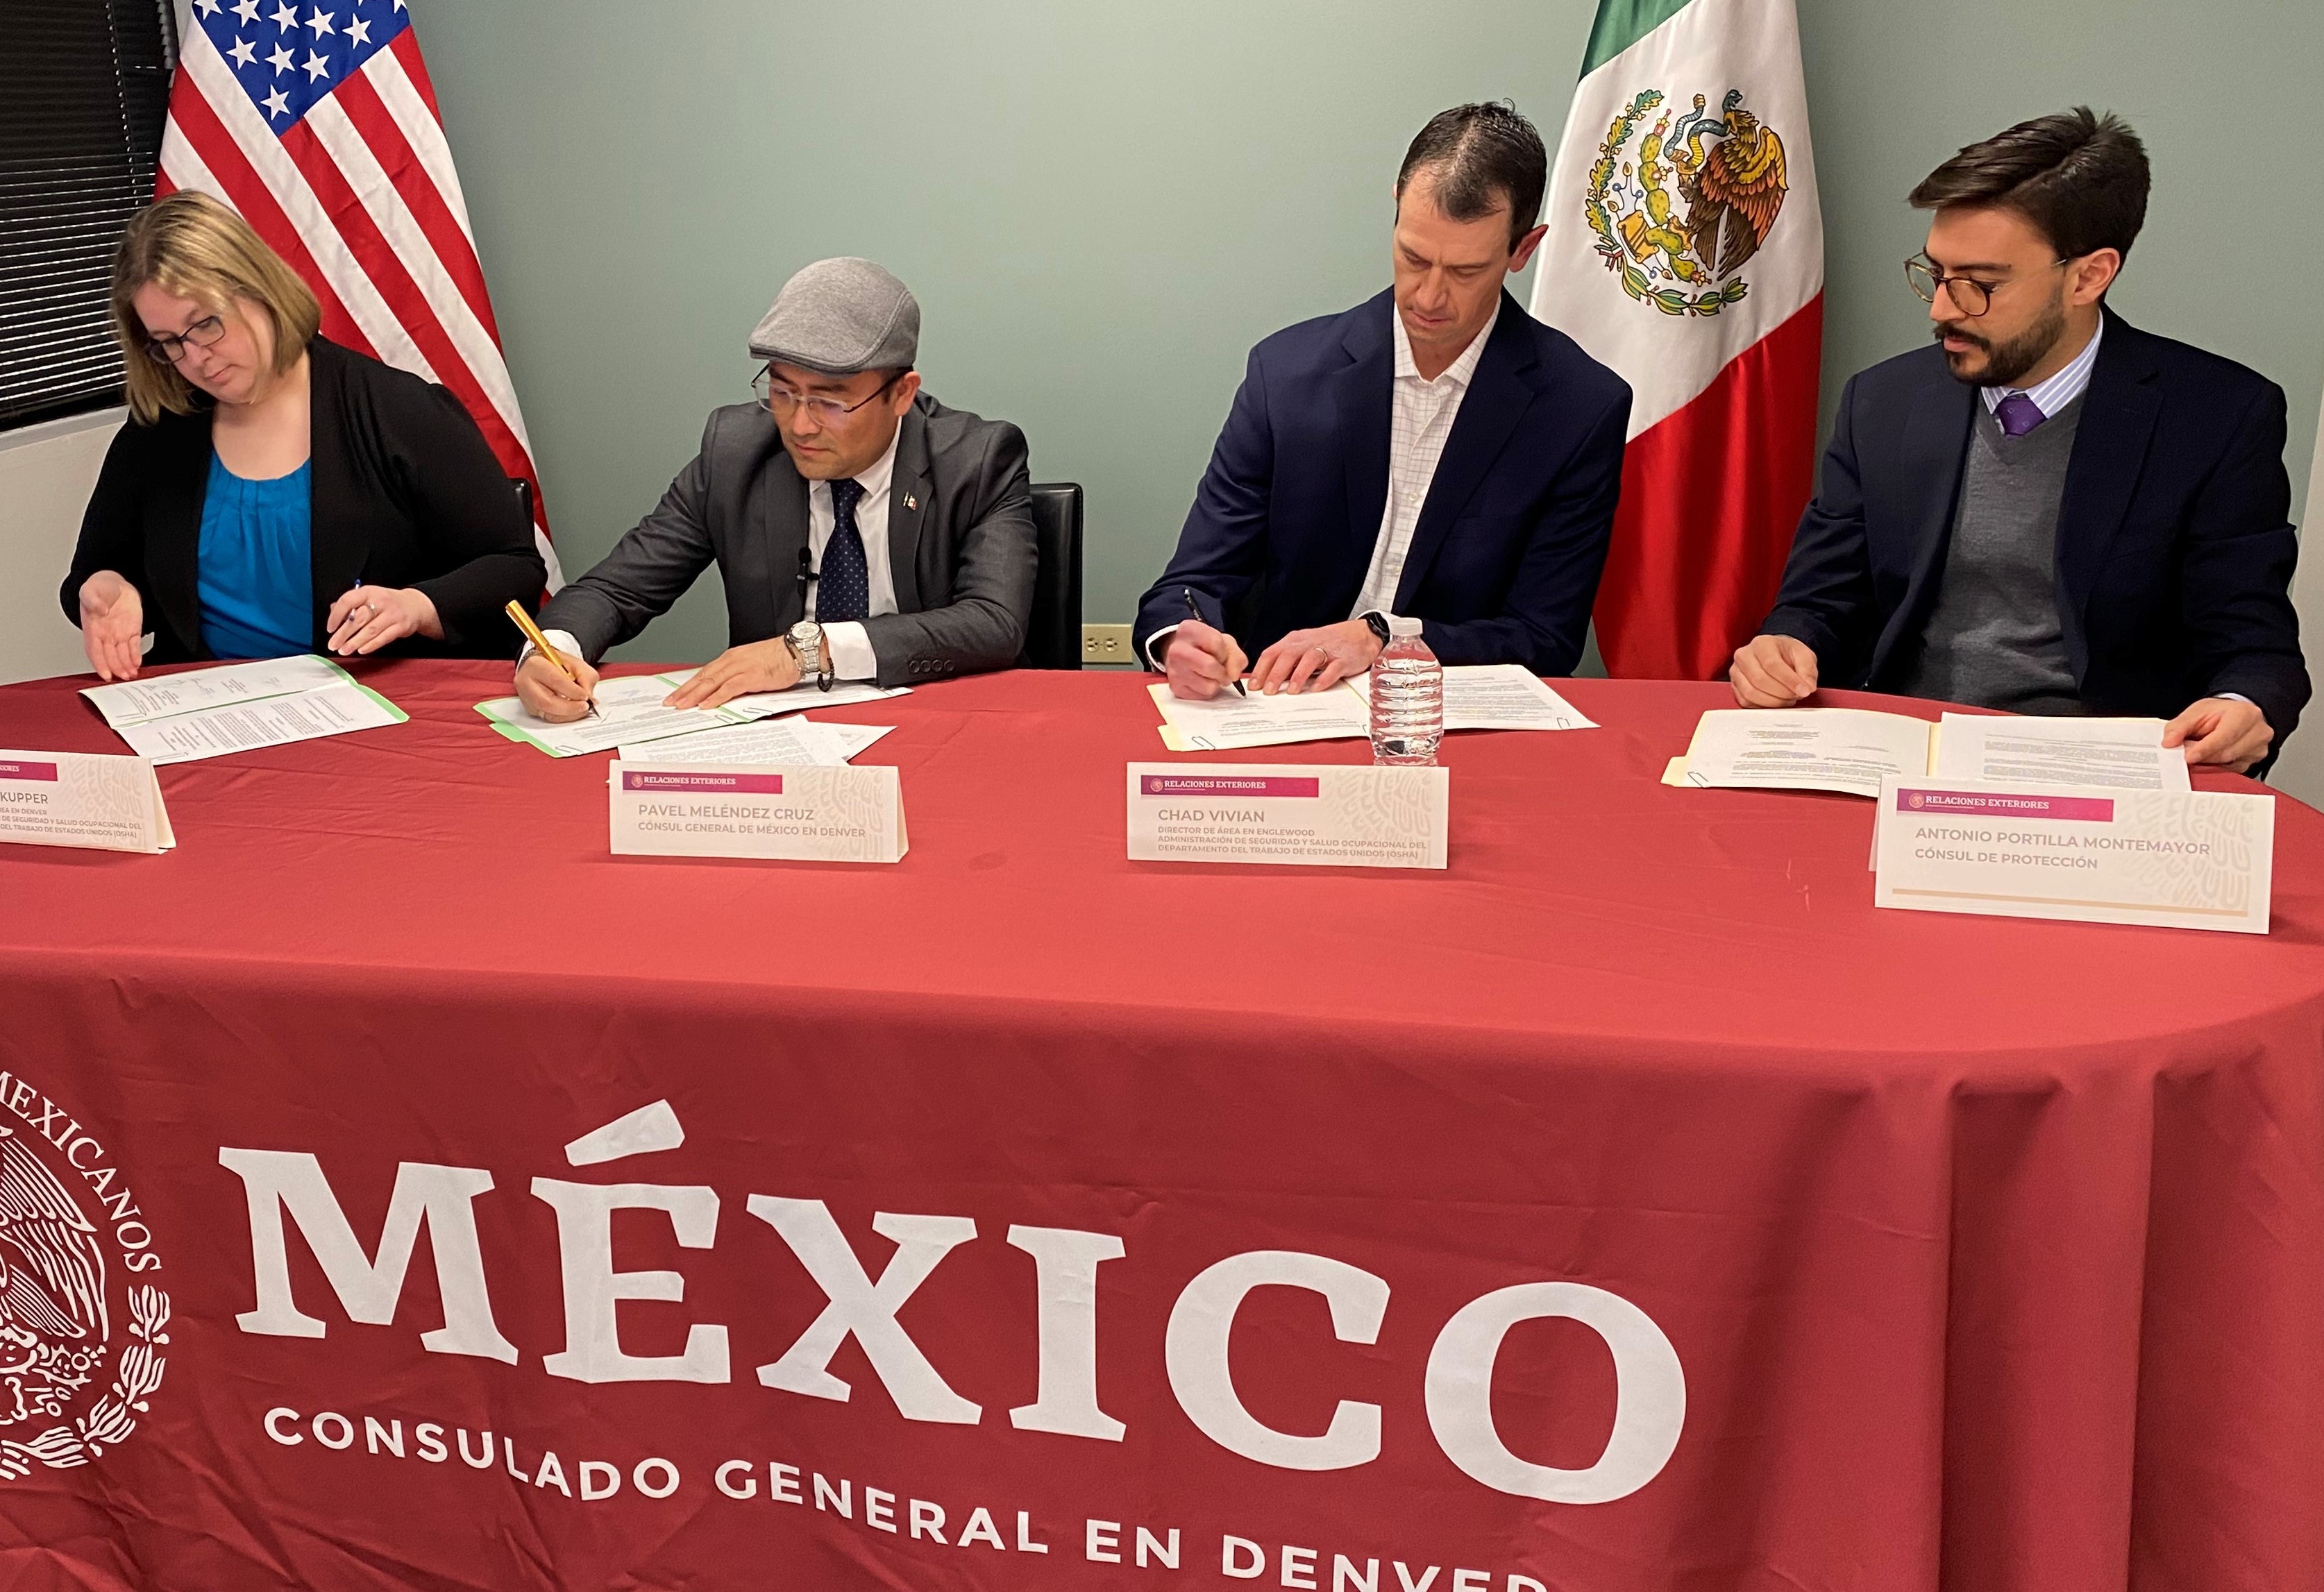 On Feb. 9, 2023, OSHA Area Director in Denver, Amanda Kupper; Mexico’s Counsel General in Denver, Pàvel Melèndez Cruz; OSHA Area Director in Englewood, Chad Vivian; and Mexico’s Consul for Protection and Legal Affairs in Denver, Antonio Portilla Montemayor renewed a two-year alliance agreement between OSHA and the Consulate of Mexico in Denver to promote workplace safety among Spanish-speaking workers in the region.